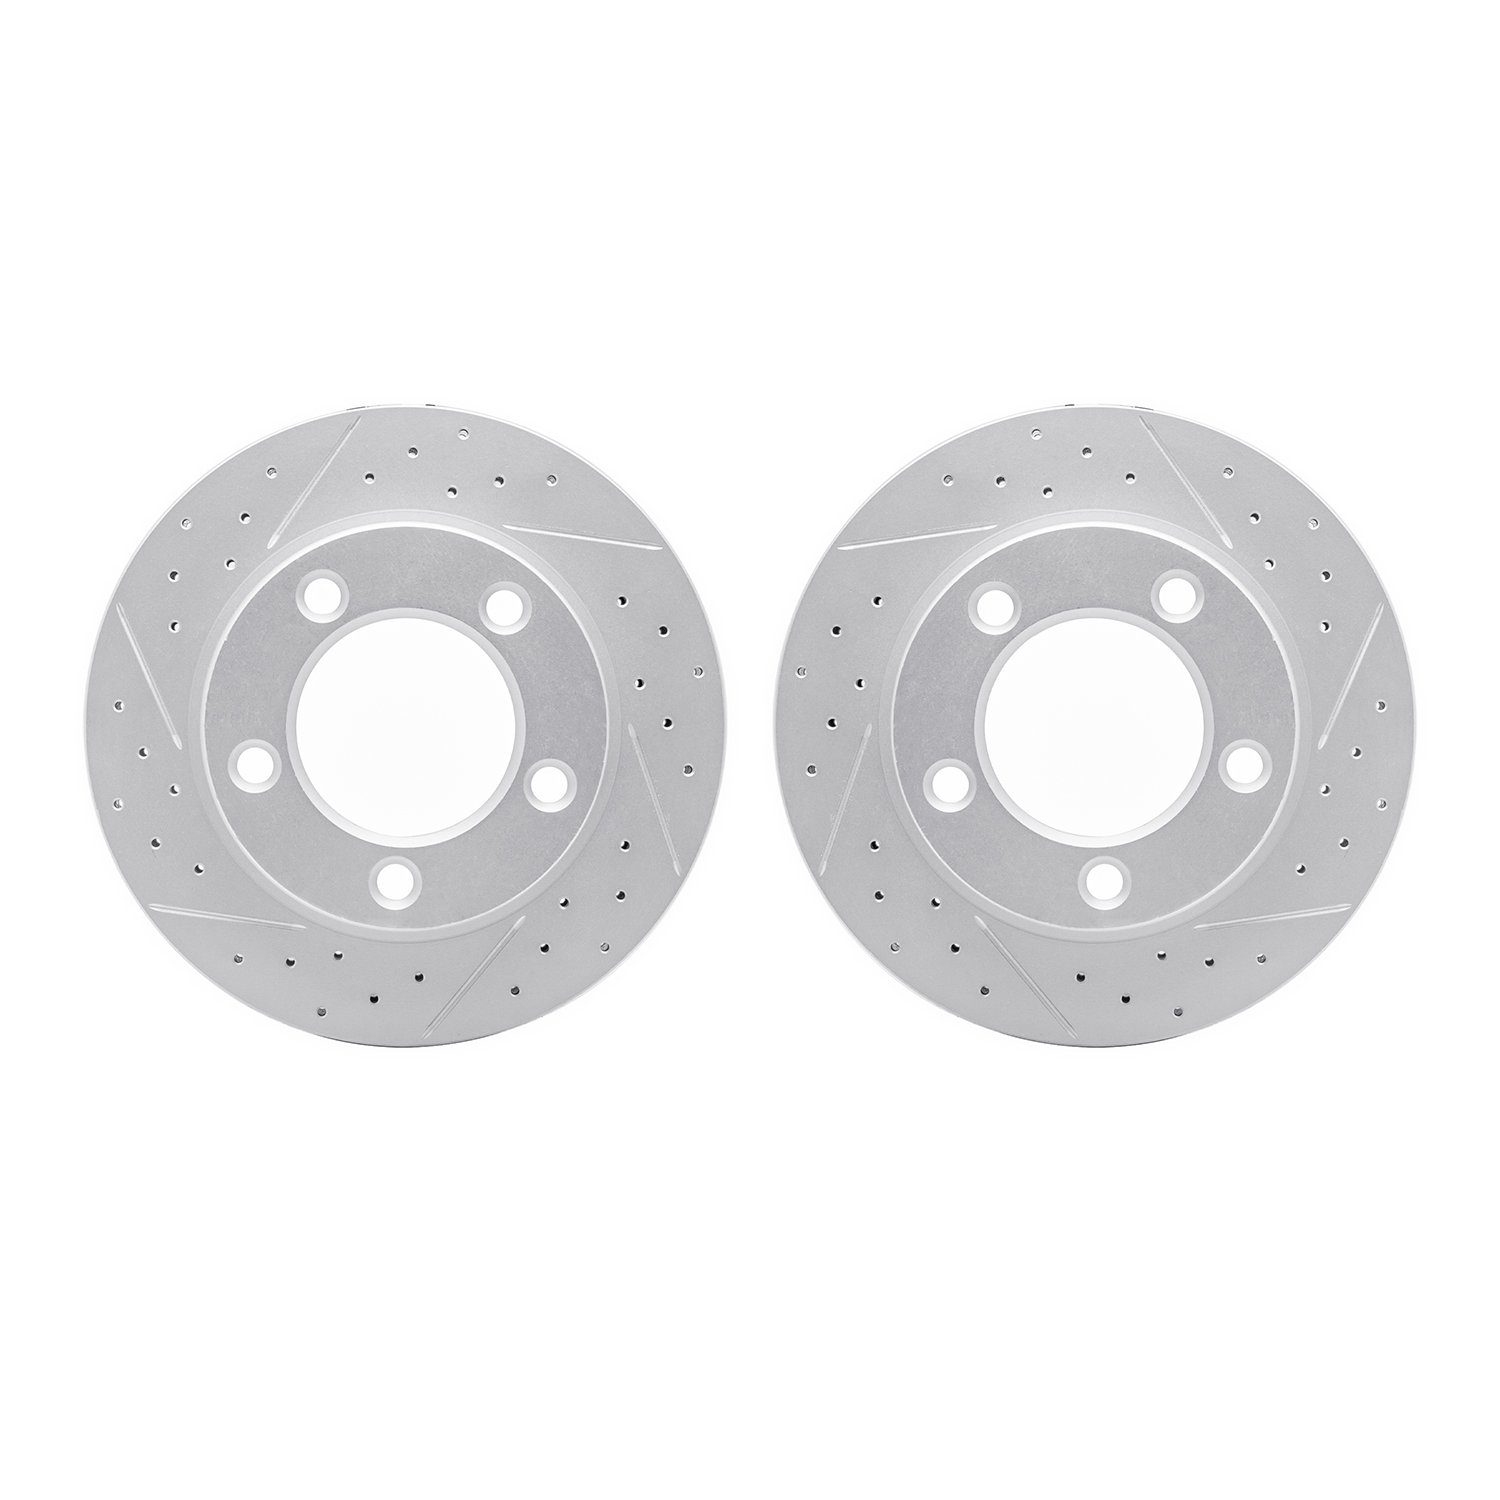 2002-54023 Geoperformance Drilled/Slotted Brake Rotors, 2007-2015 Ford/Lincoln/Mercury/Mazda, Position: Front